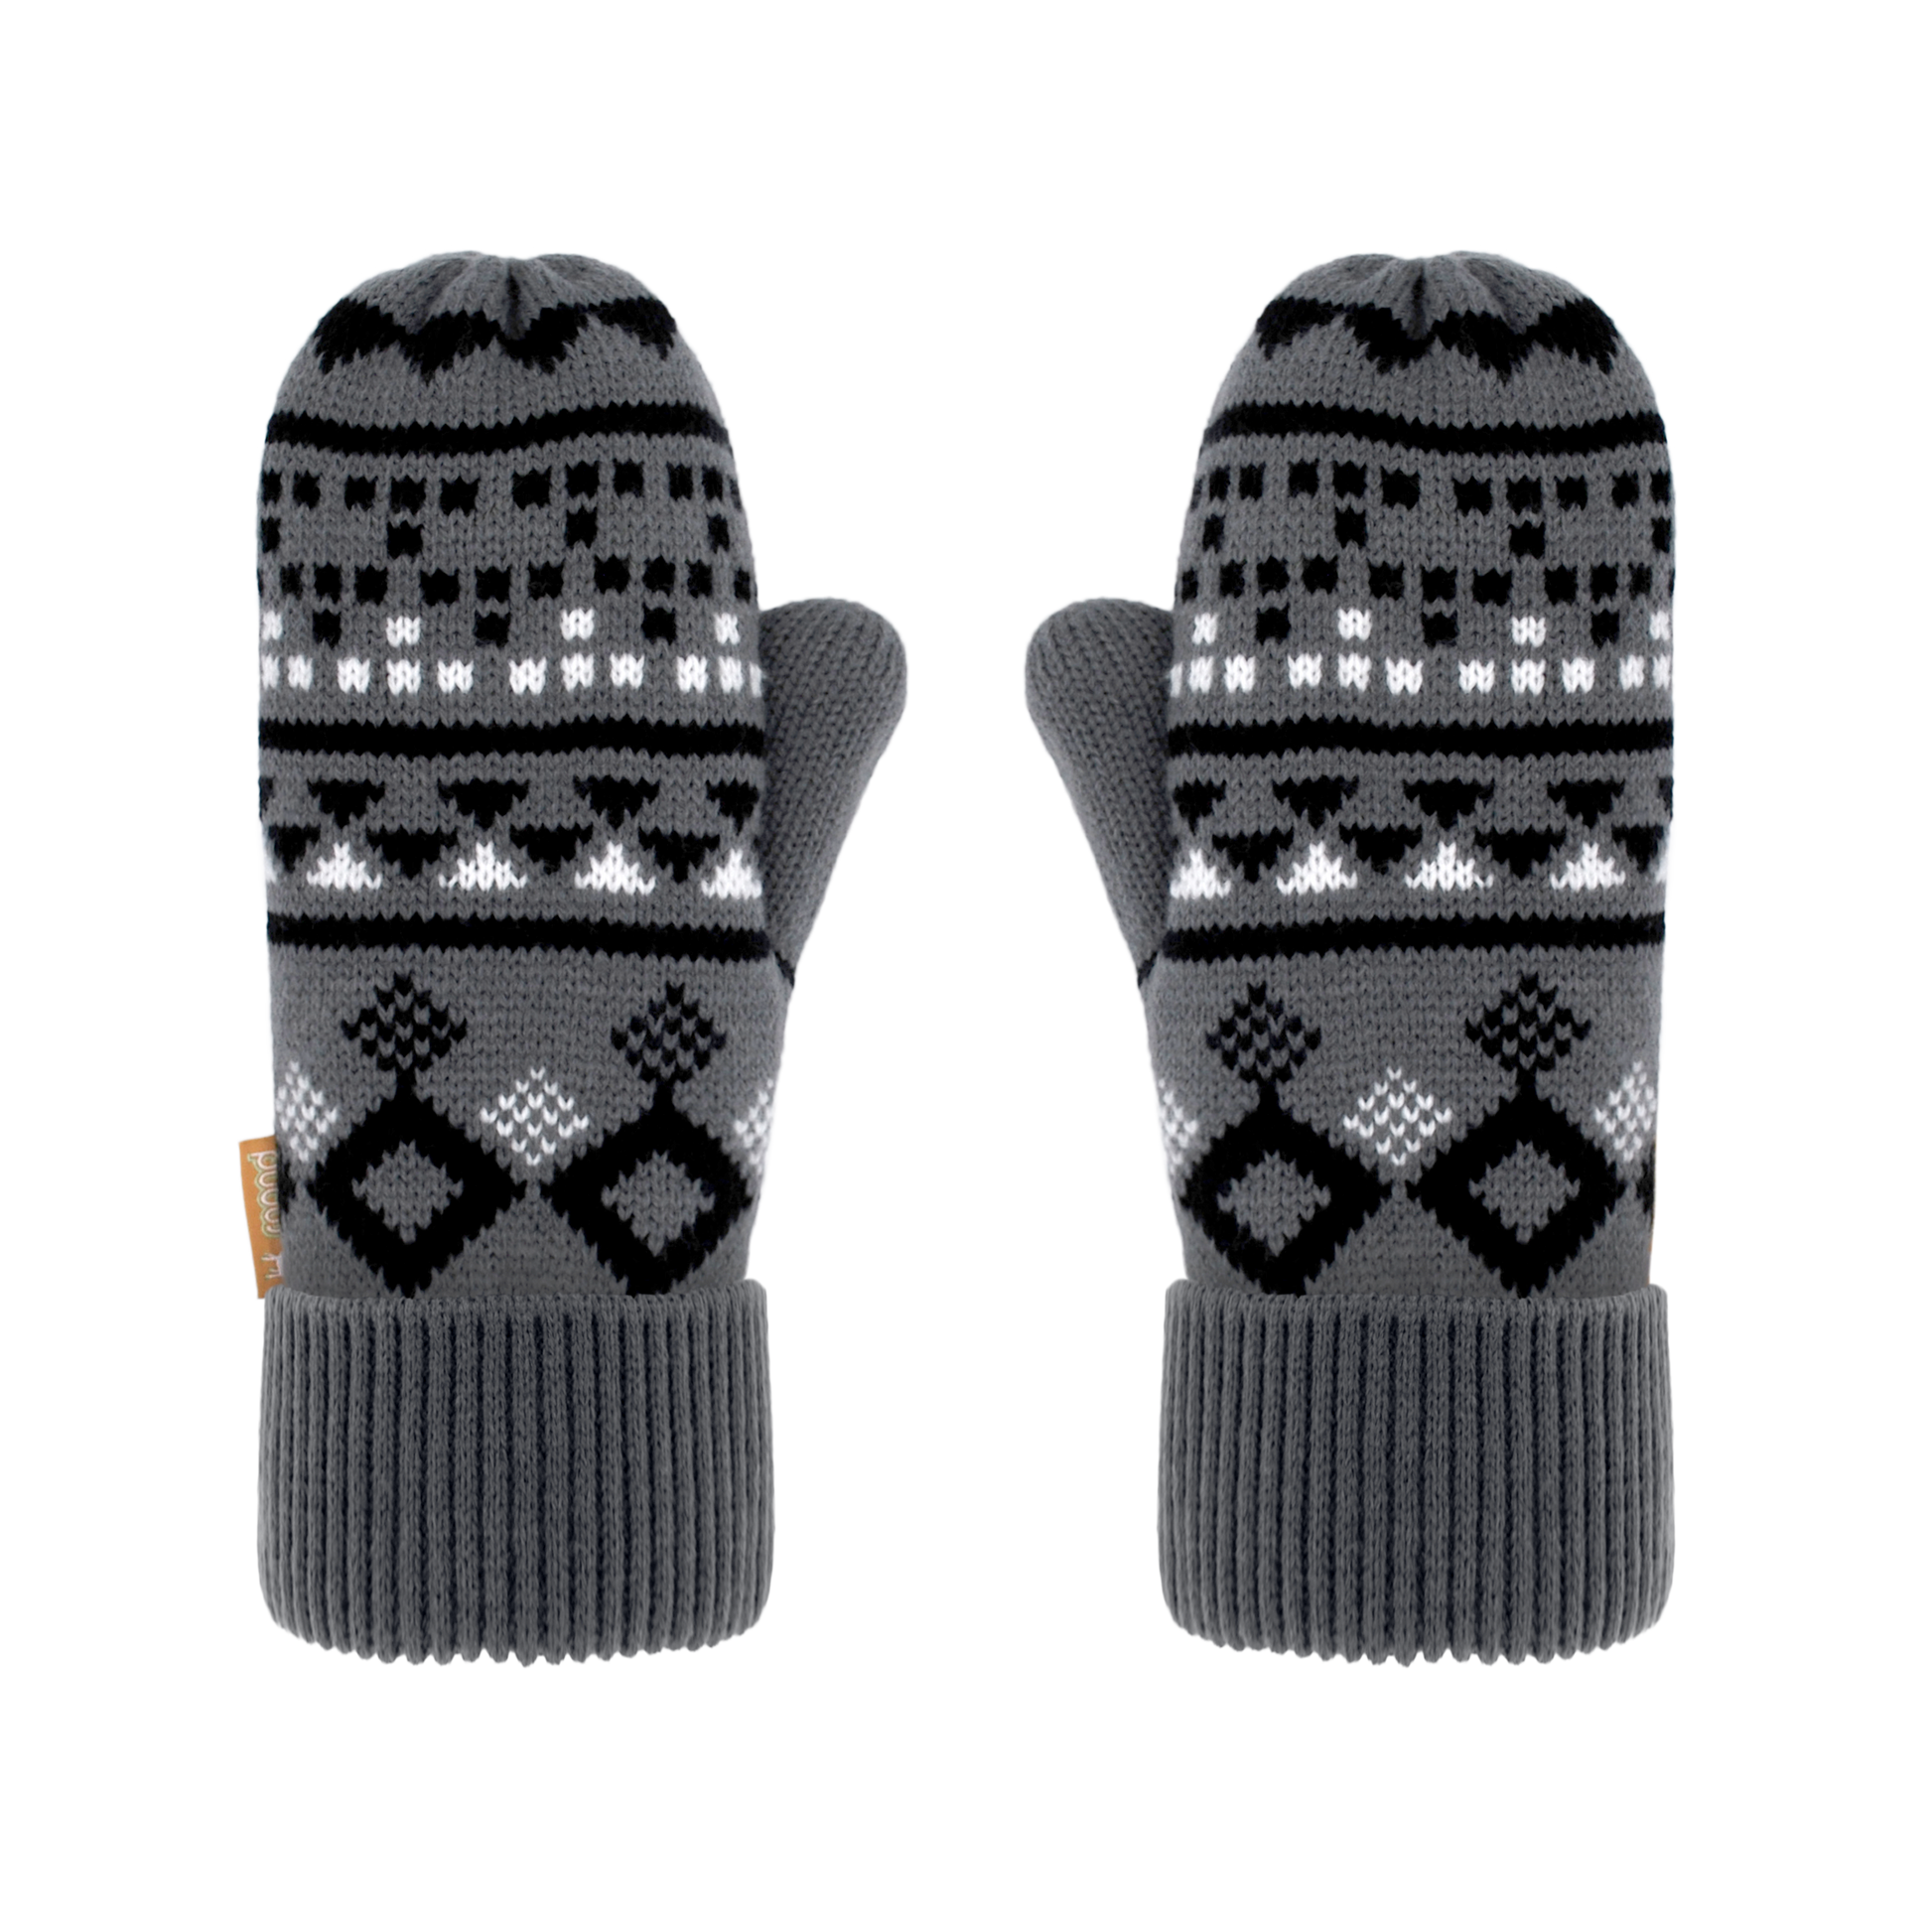 Pudus Classic Knit Winter Mittens for Women, Sherpa Fleece-Lined Warm Gloves Geometric Black - Mittens Adult